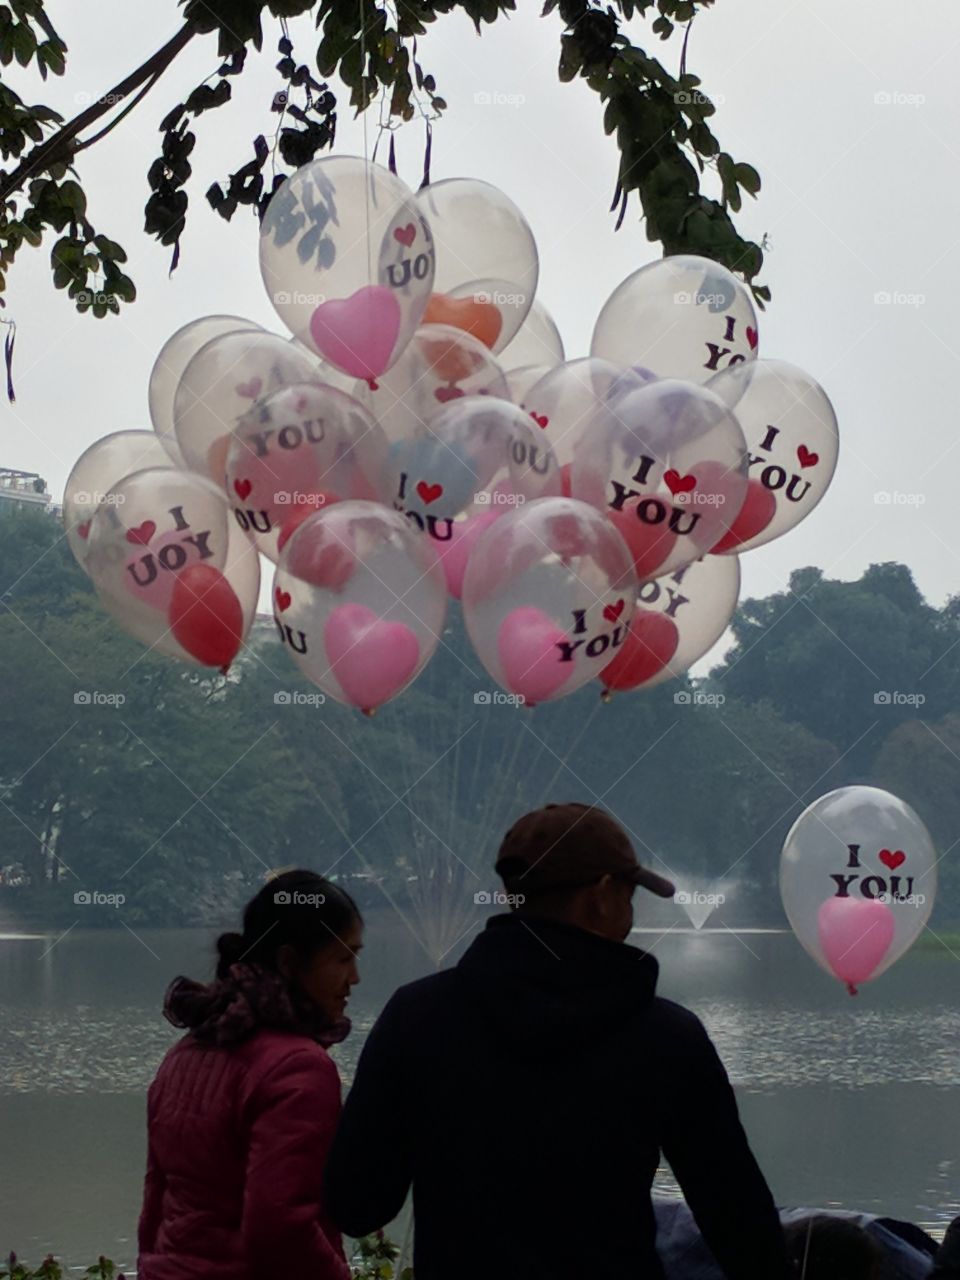 A sunday filled with love in Hanoi Lake.